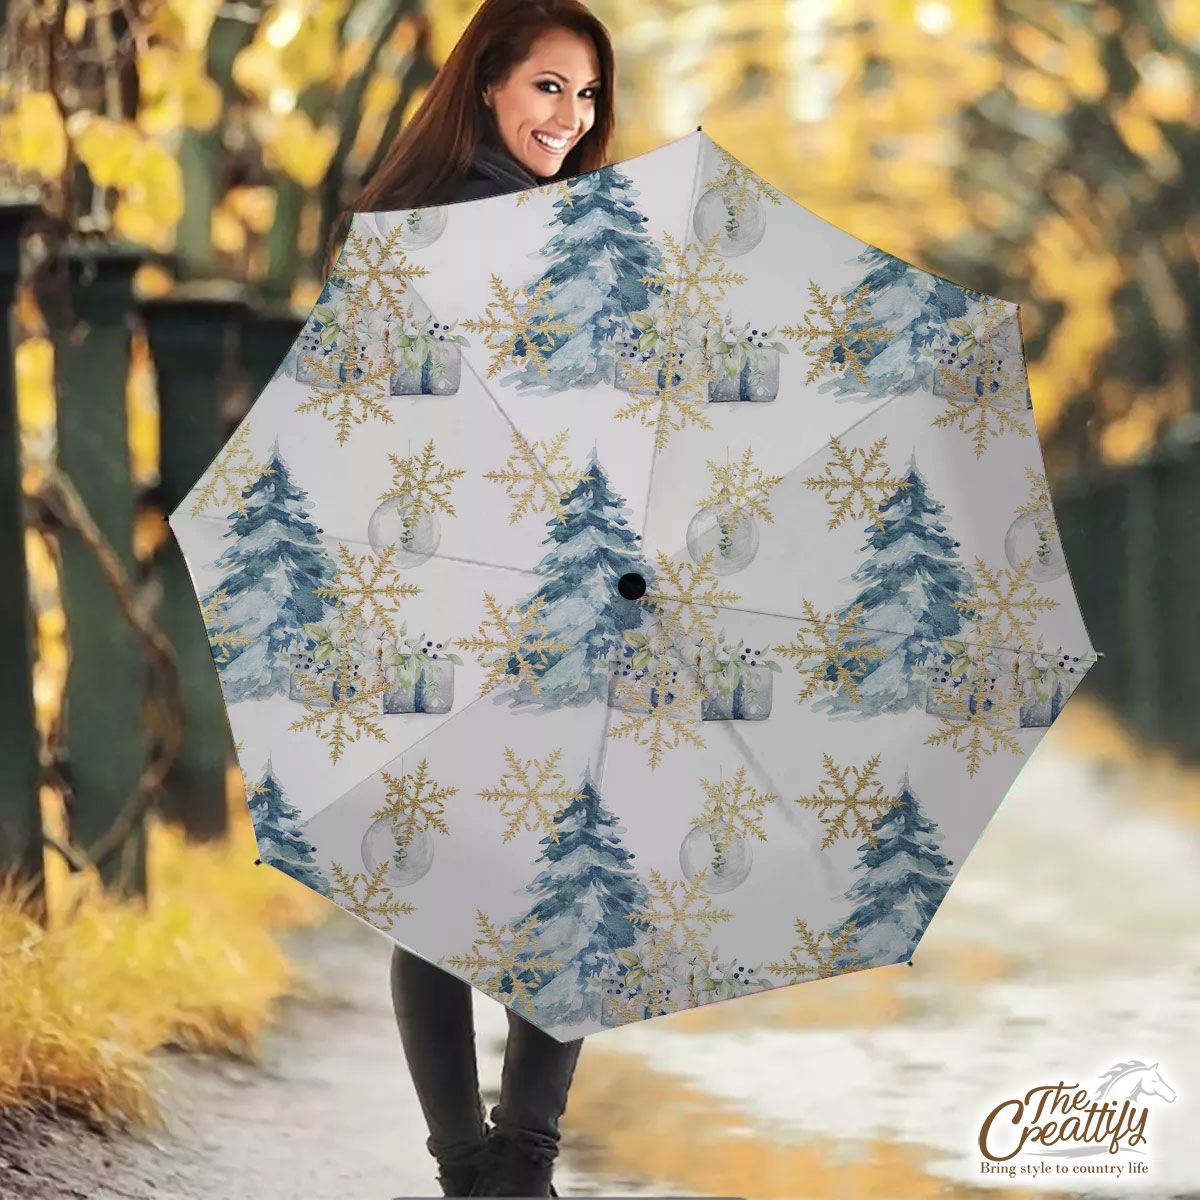 Chistmas Gifts, Gold Snowflake Clipart, Pine Tree And Chistmas Balls Seamless White Pattern Umbrella